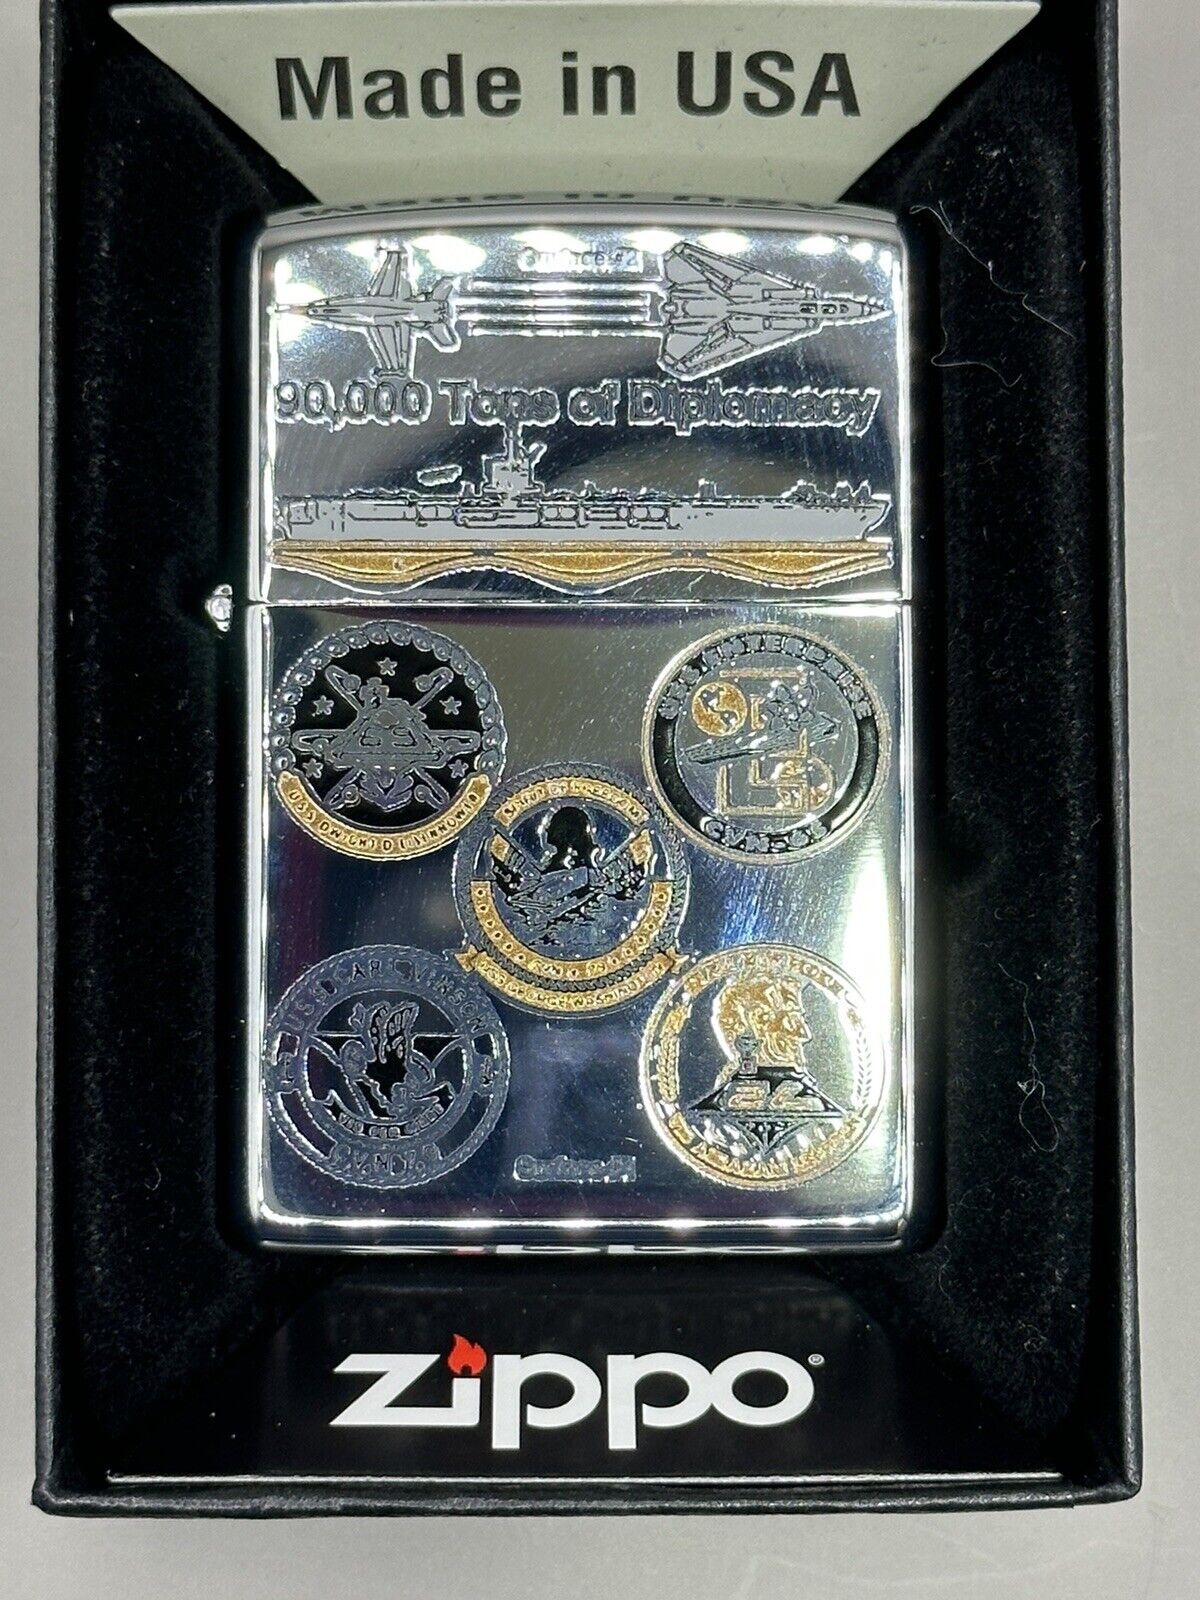 Vintage 2007 90,000 Tons Of Diplomacy U.S. Military Zippo Rare MINT New In Box